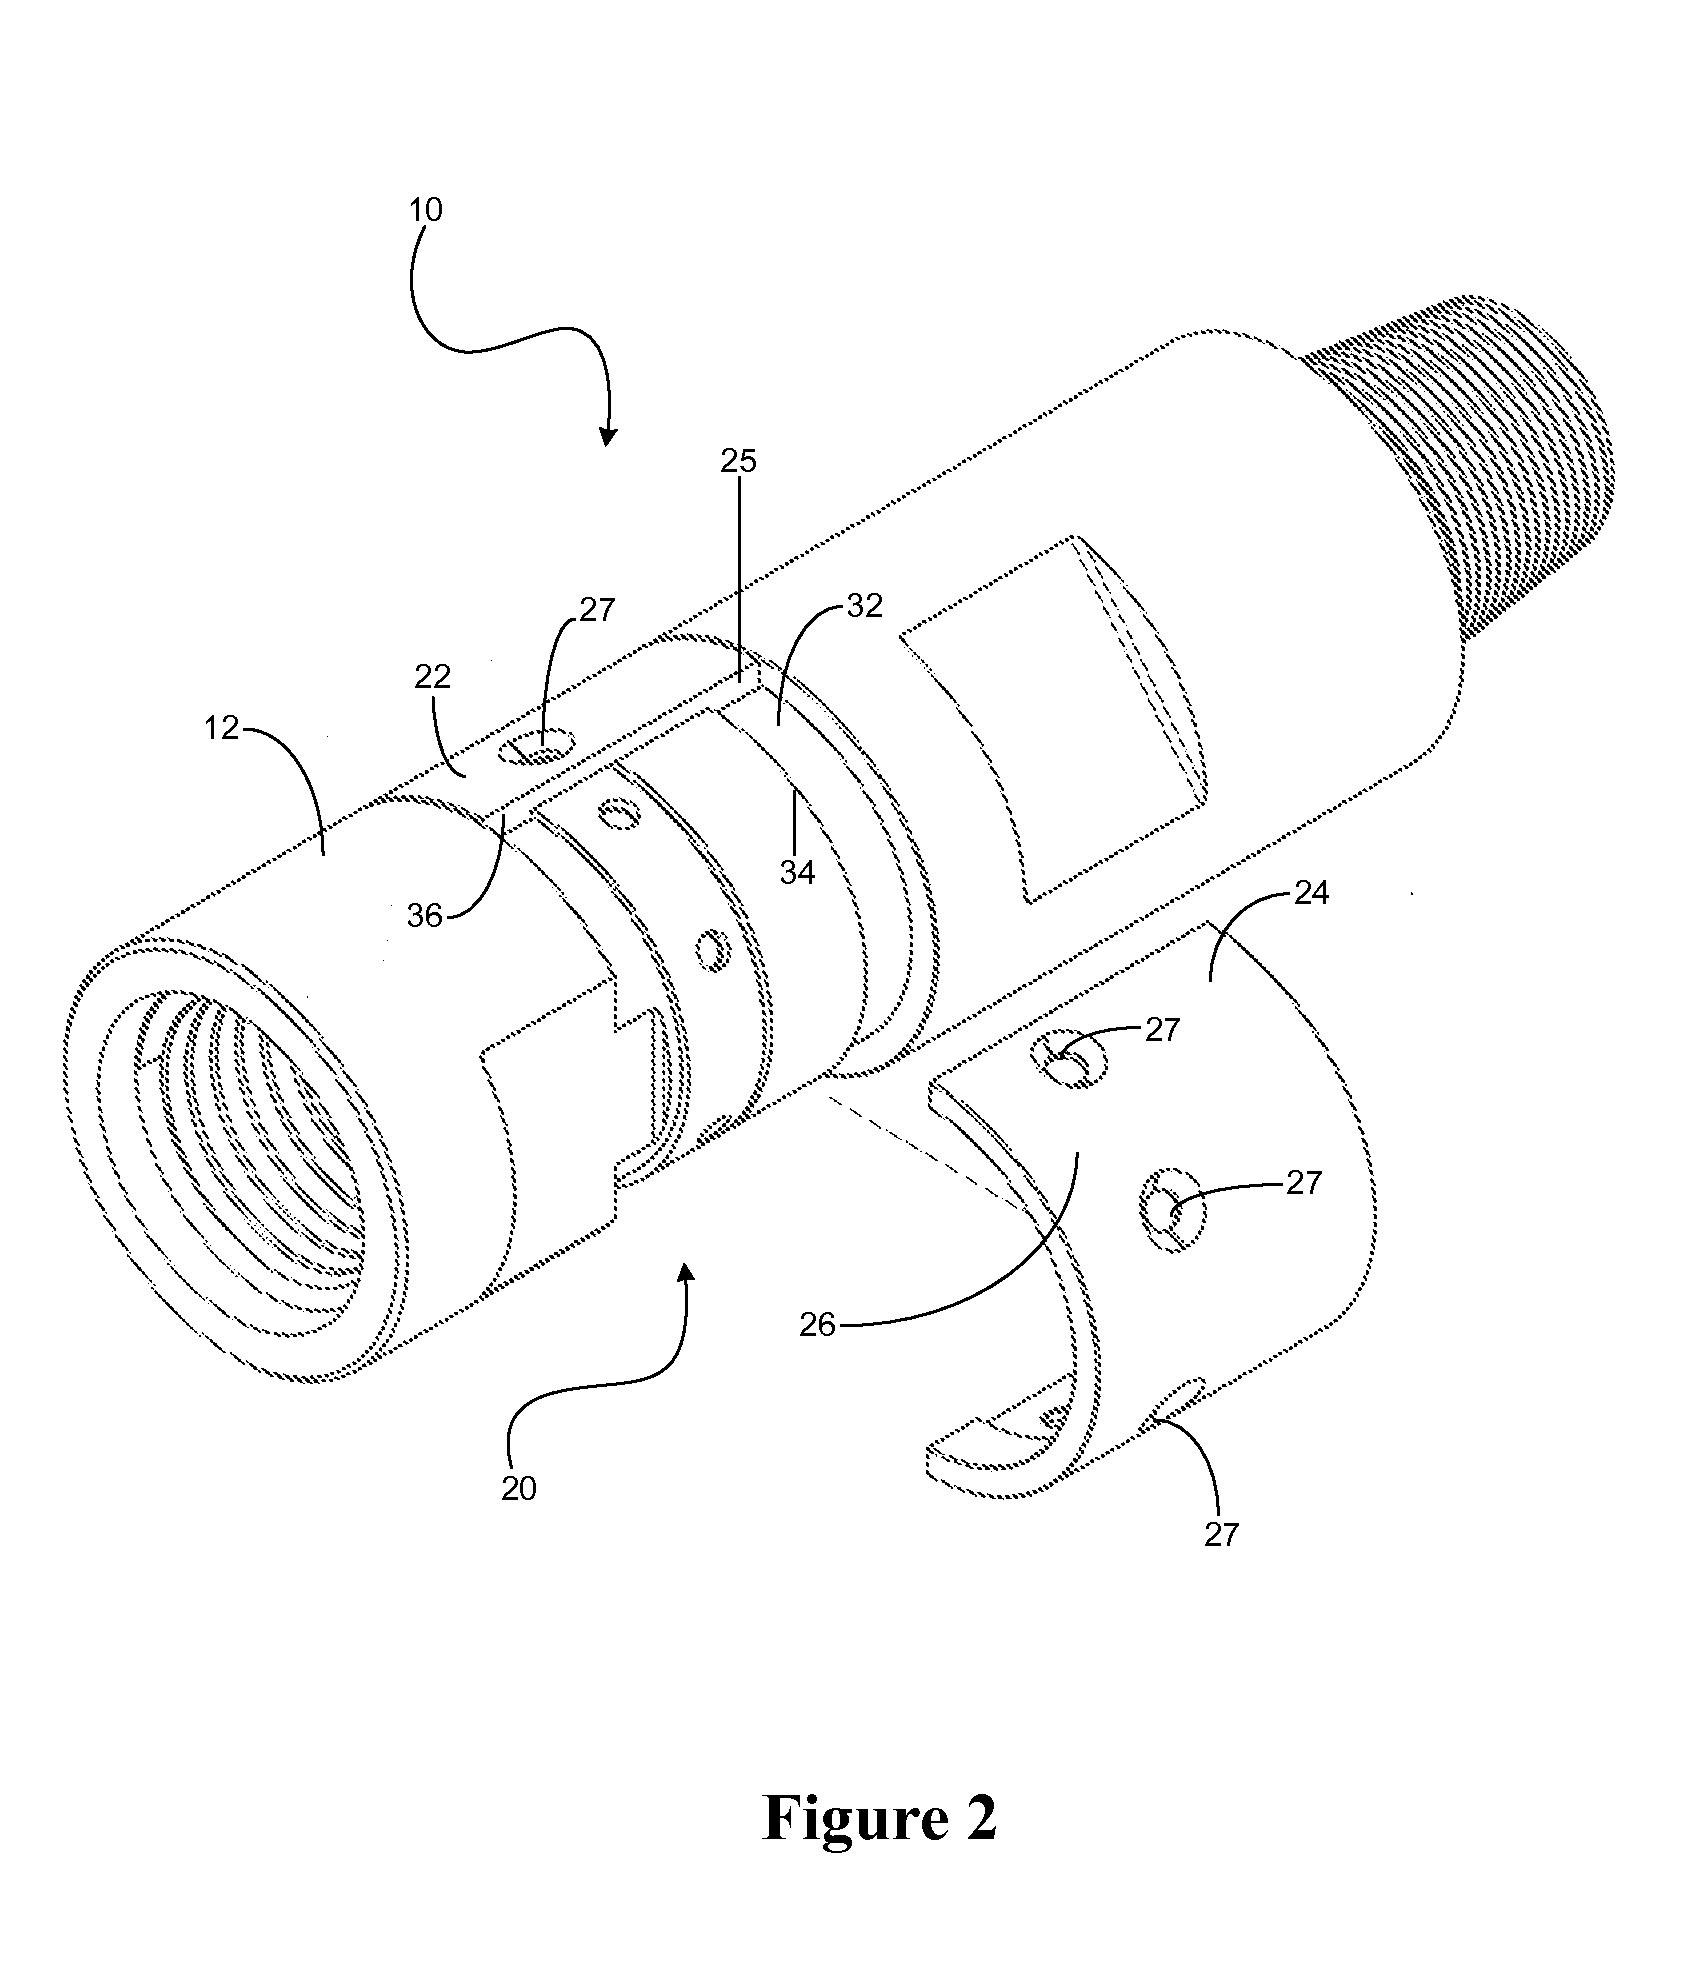 Retaining arrangement, sub adaptor and/or drill spindle